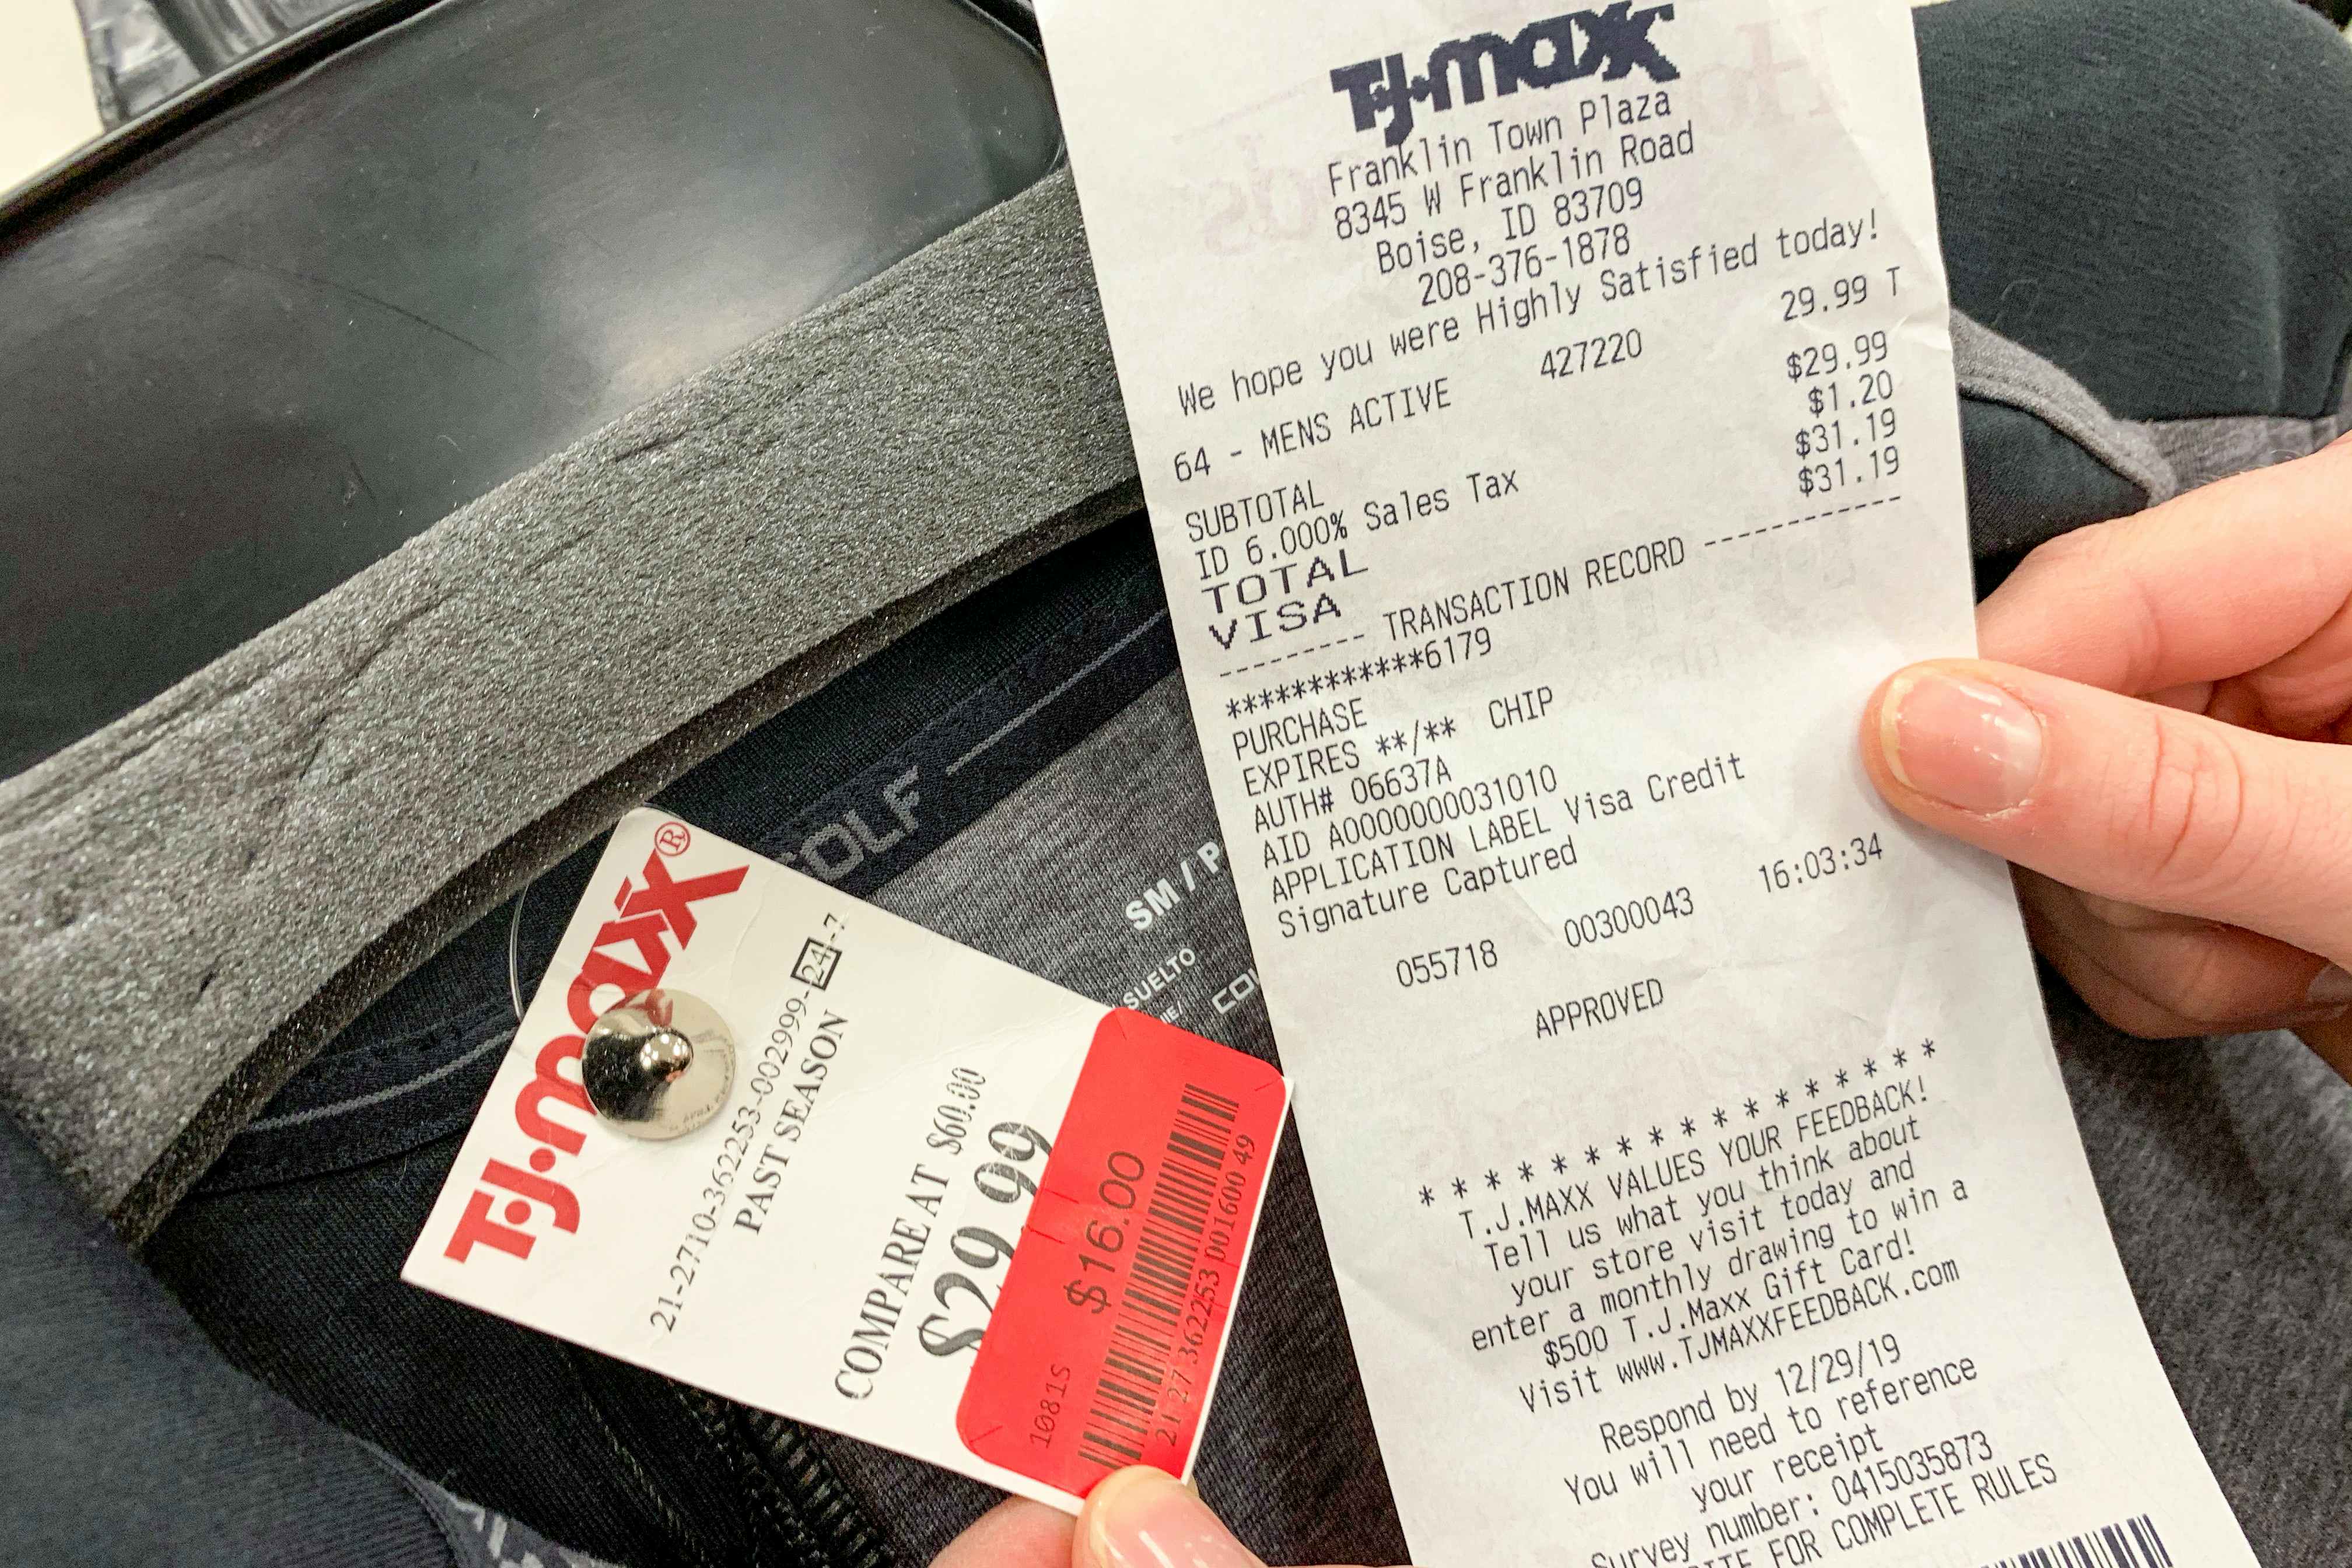 TJ Maxx owner's sales soar on new customers looking for deals – Macomb Daily